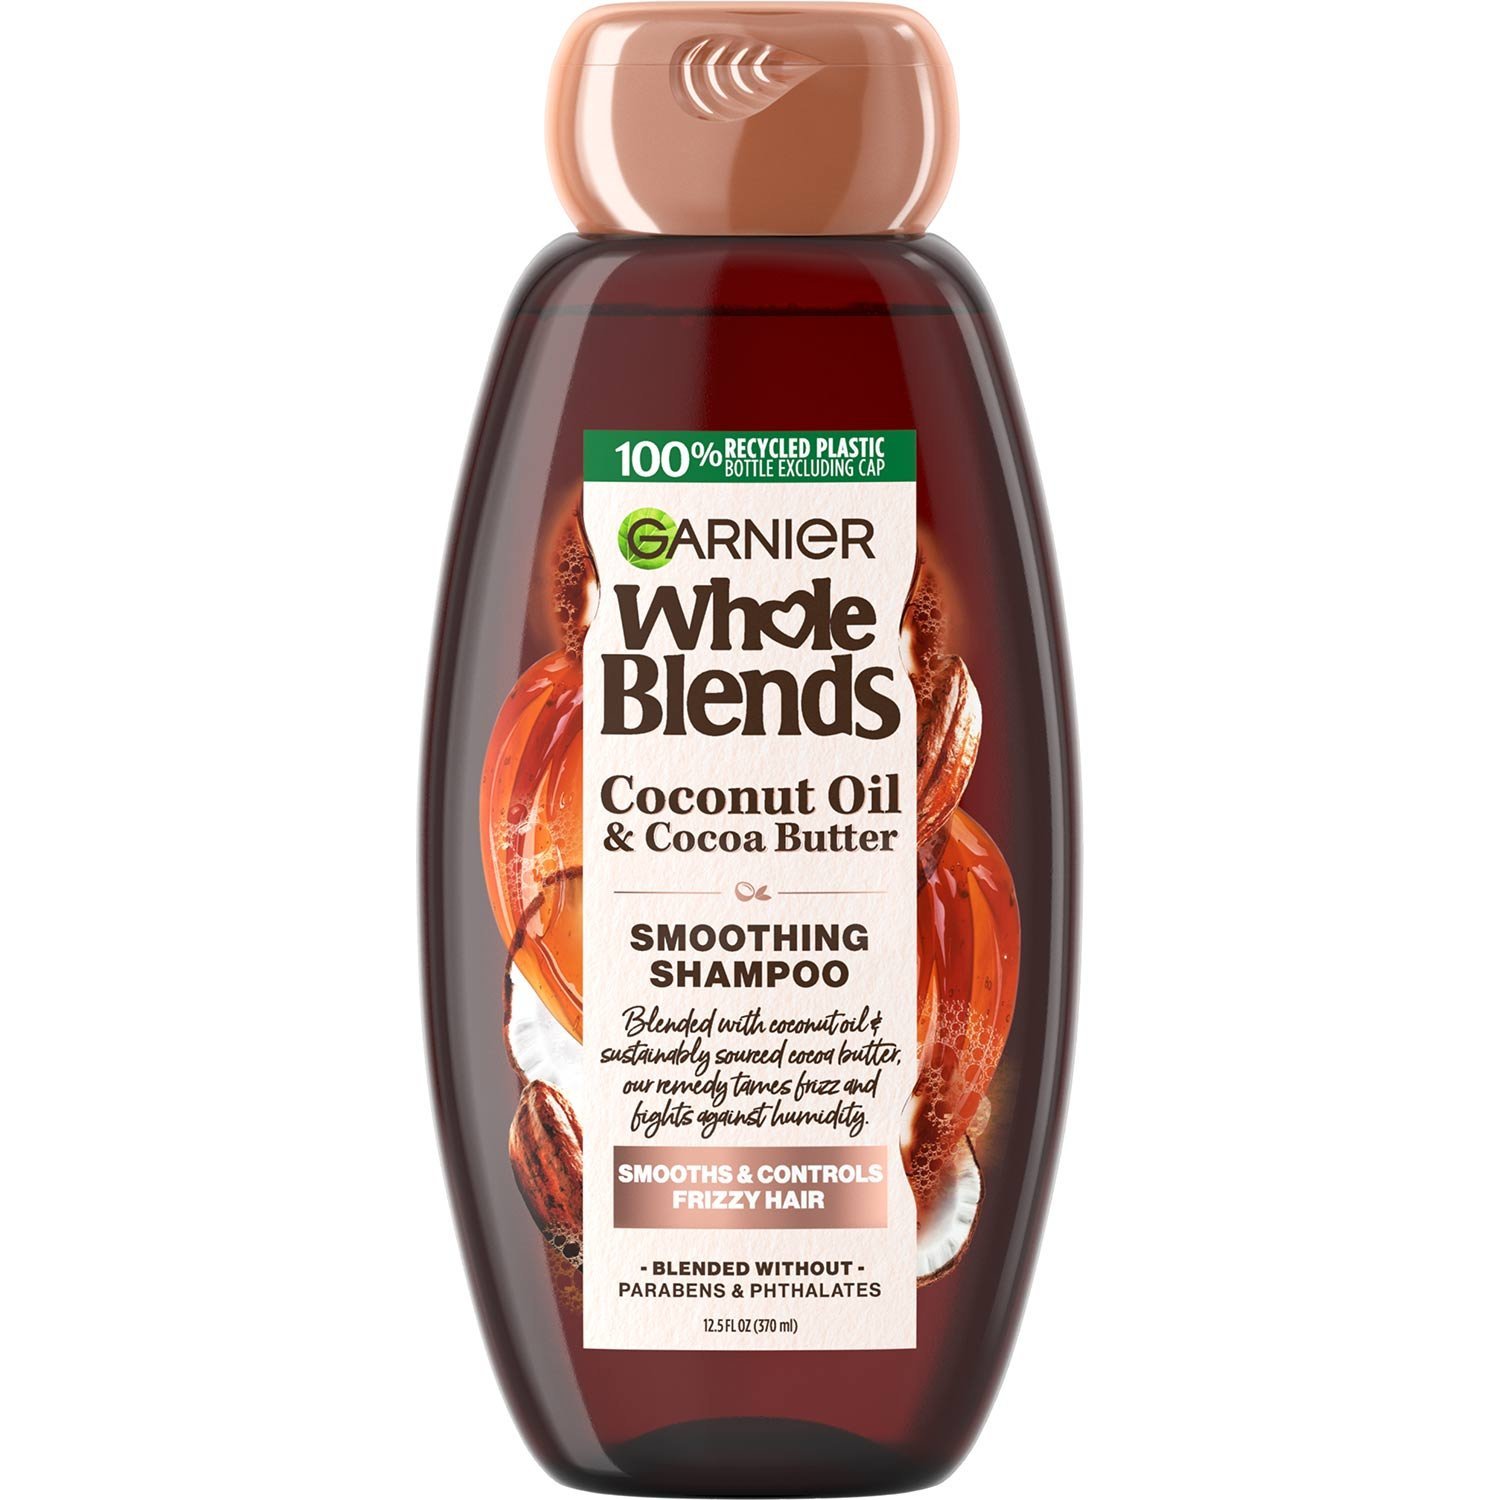 Coconut Oil & Cocoa Butter Smoothing Shampoo for extra body - Garnier